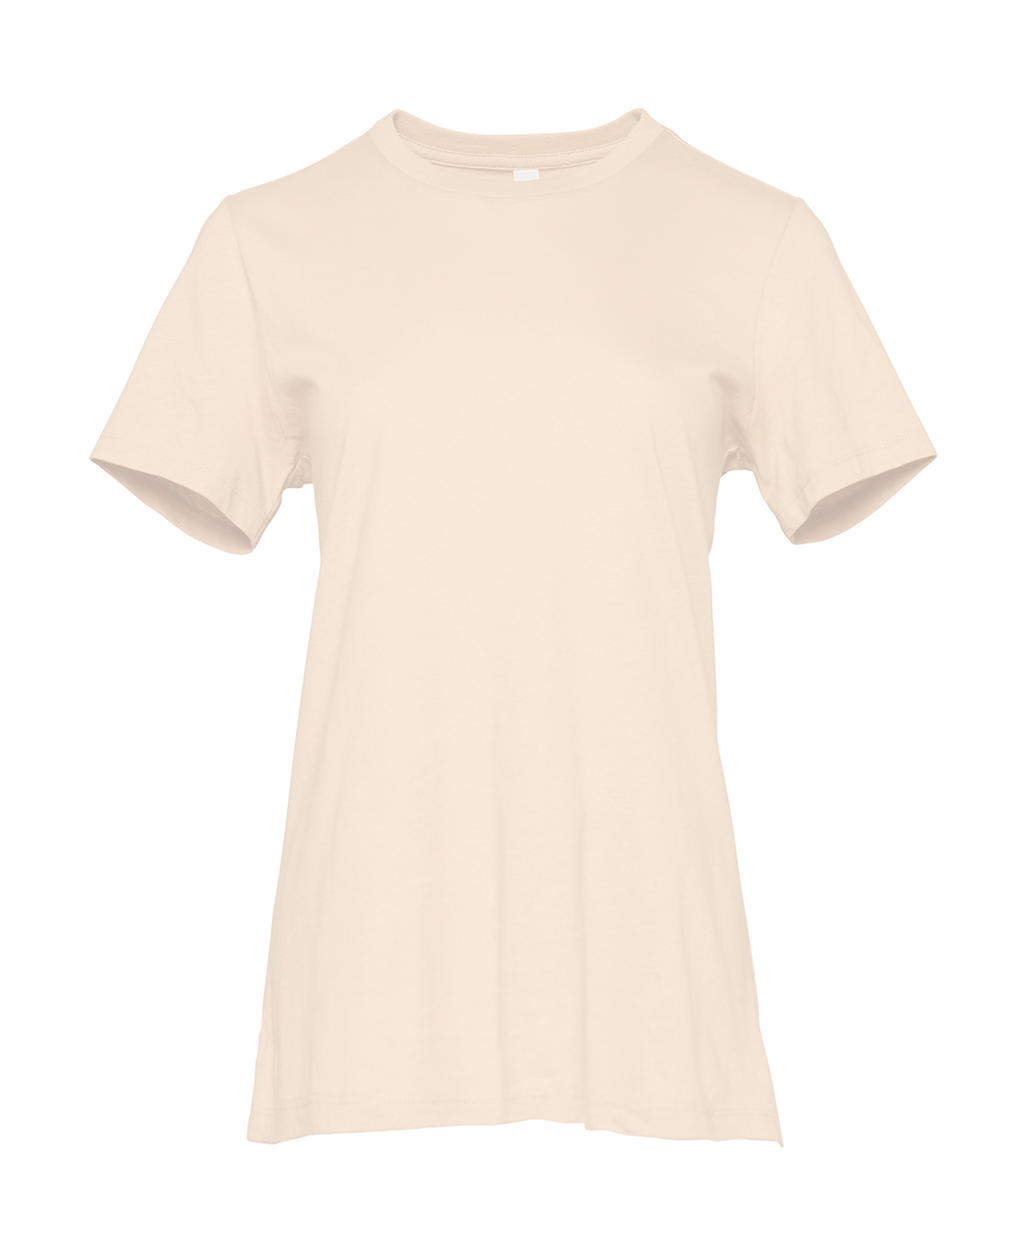  Womens Relaxed Jersey Short Sleeve Tee in Farbe Heather Natural